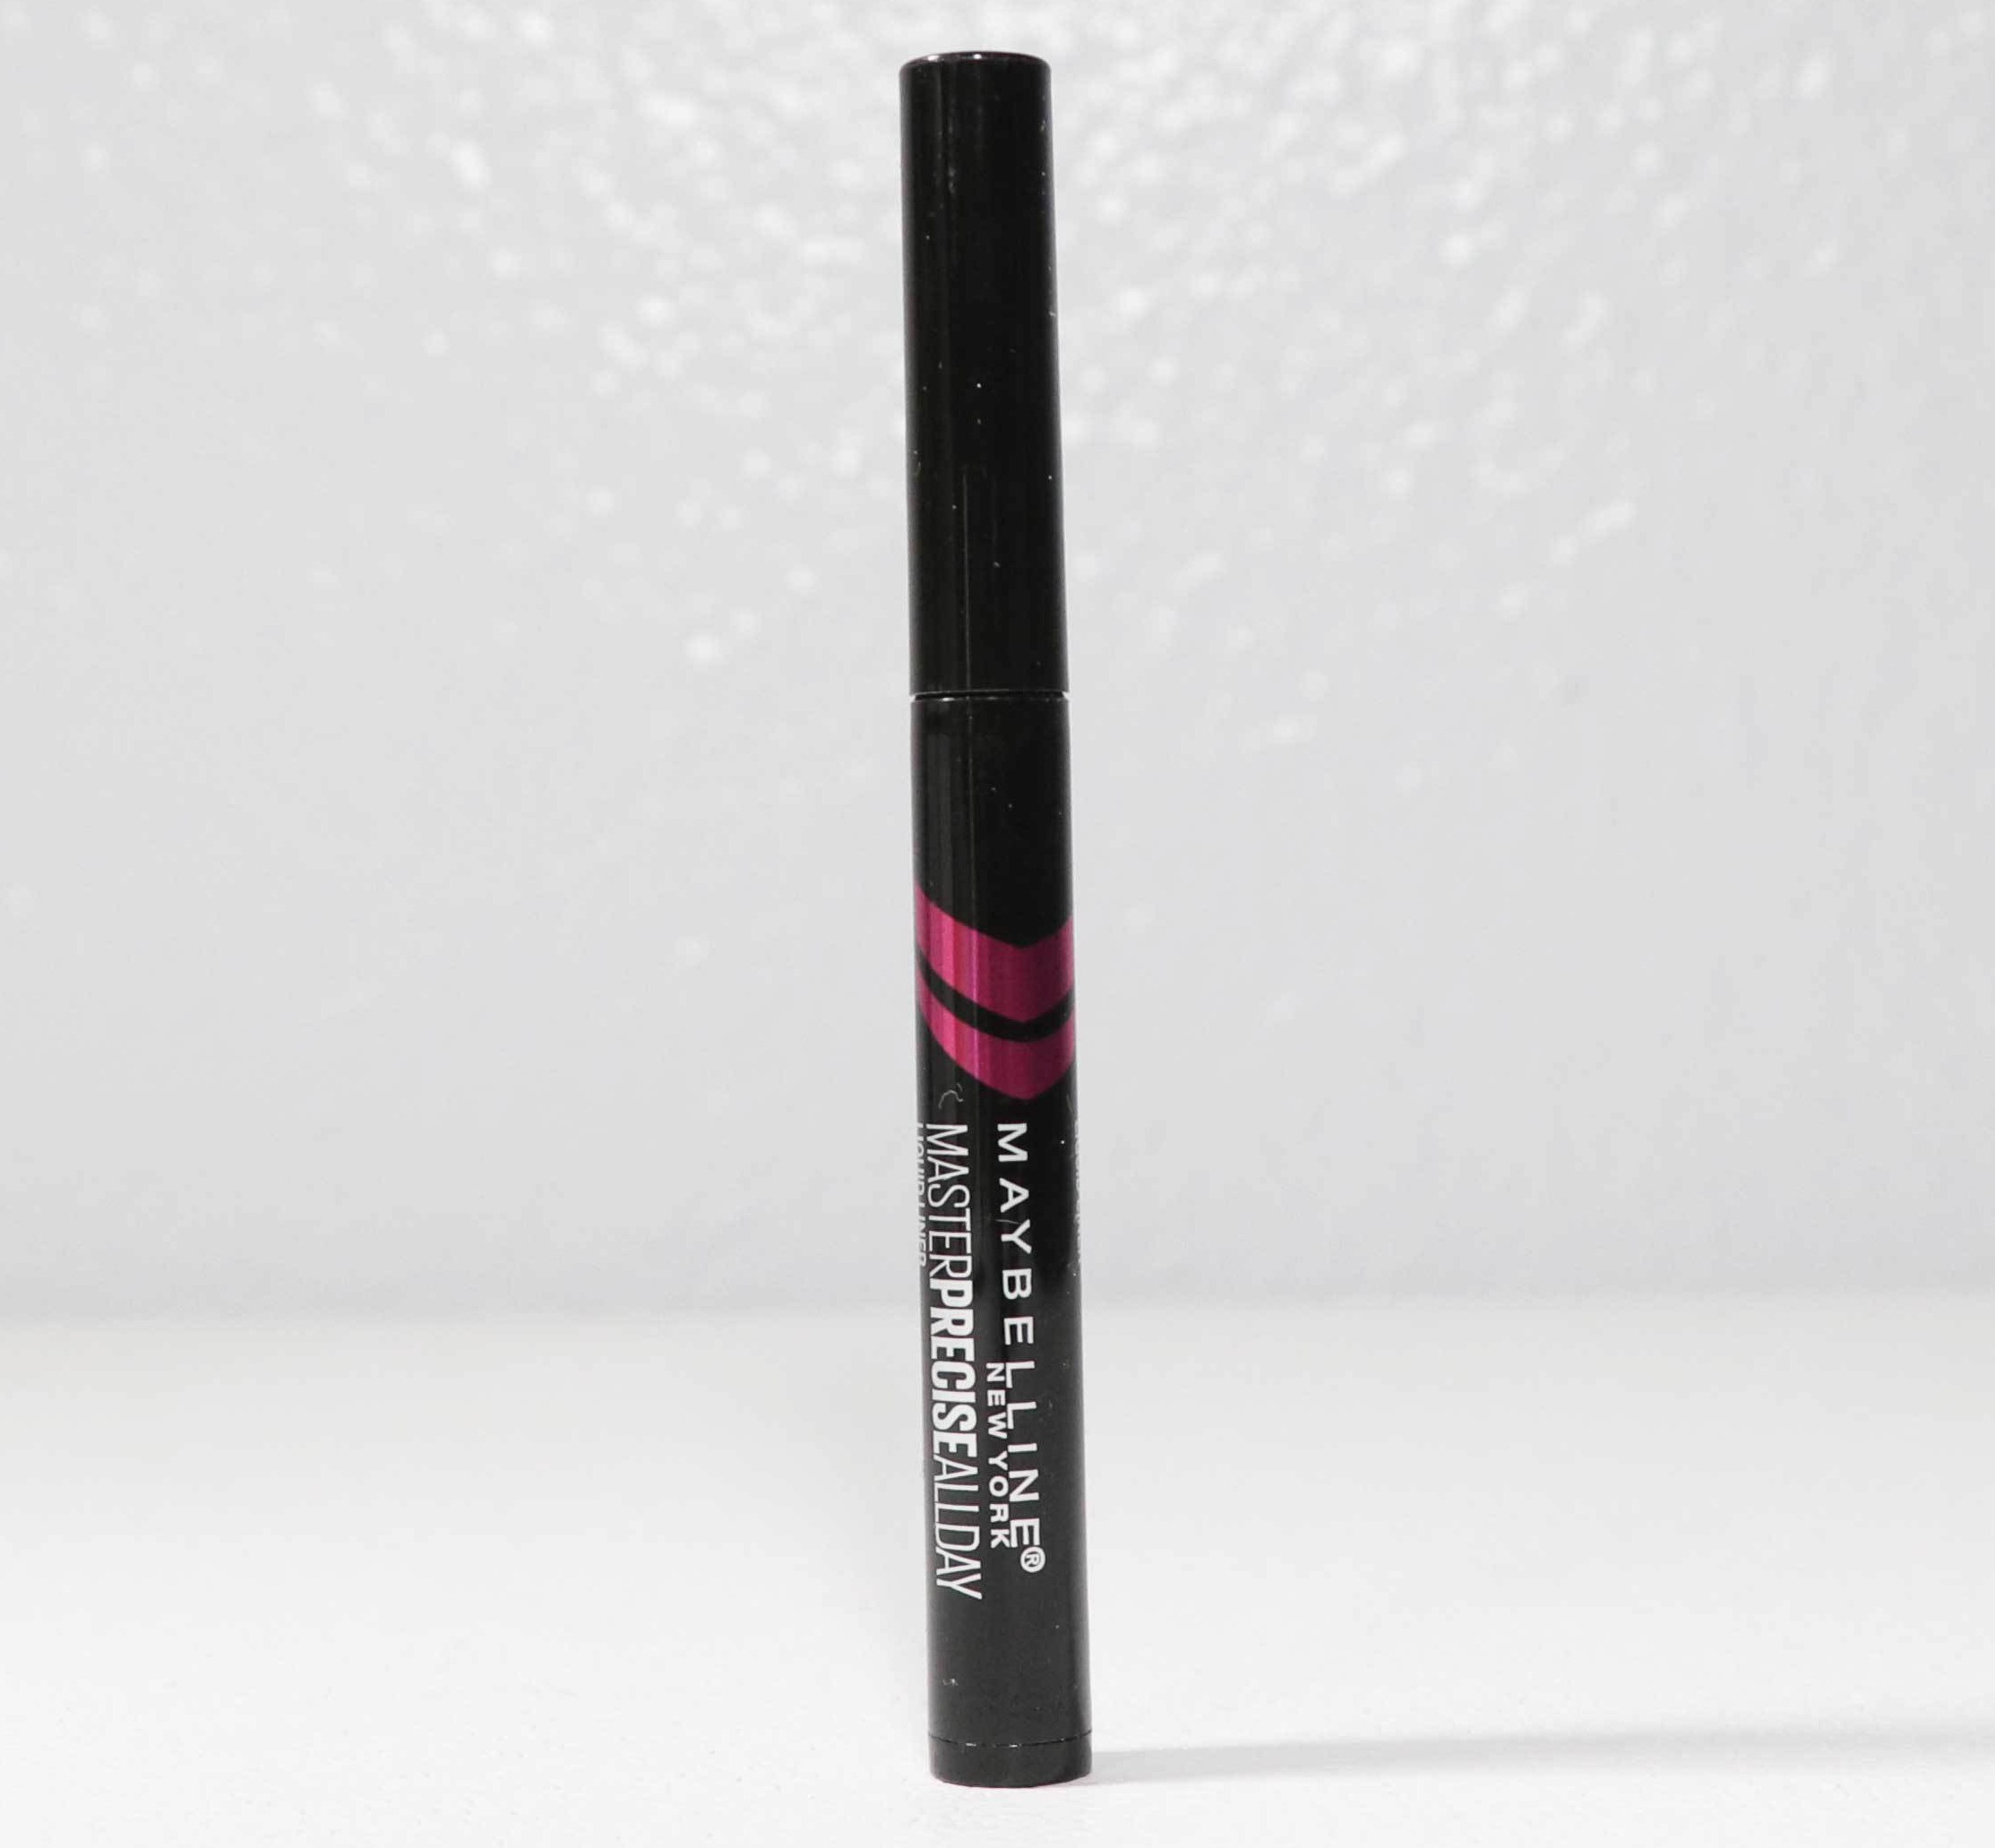 Maybelline Master Precise All Day Liquid Liner in black